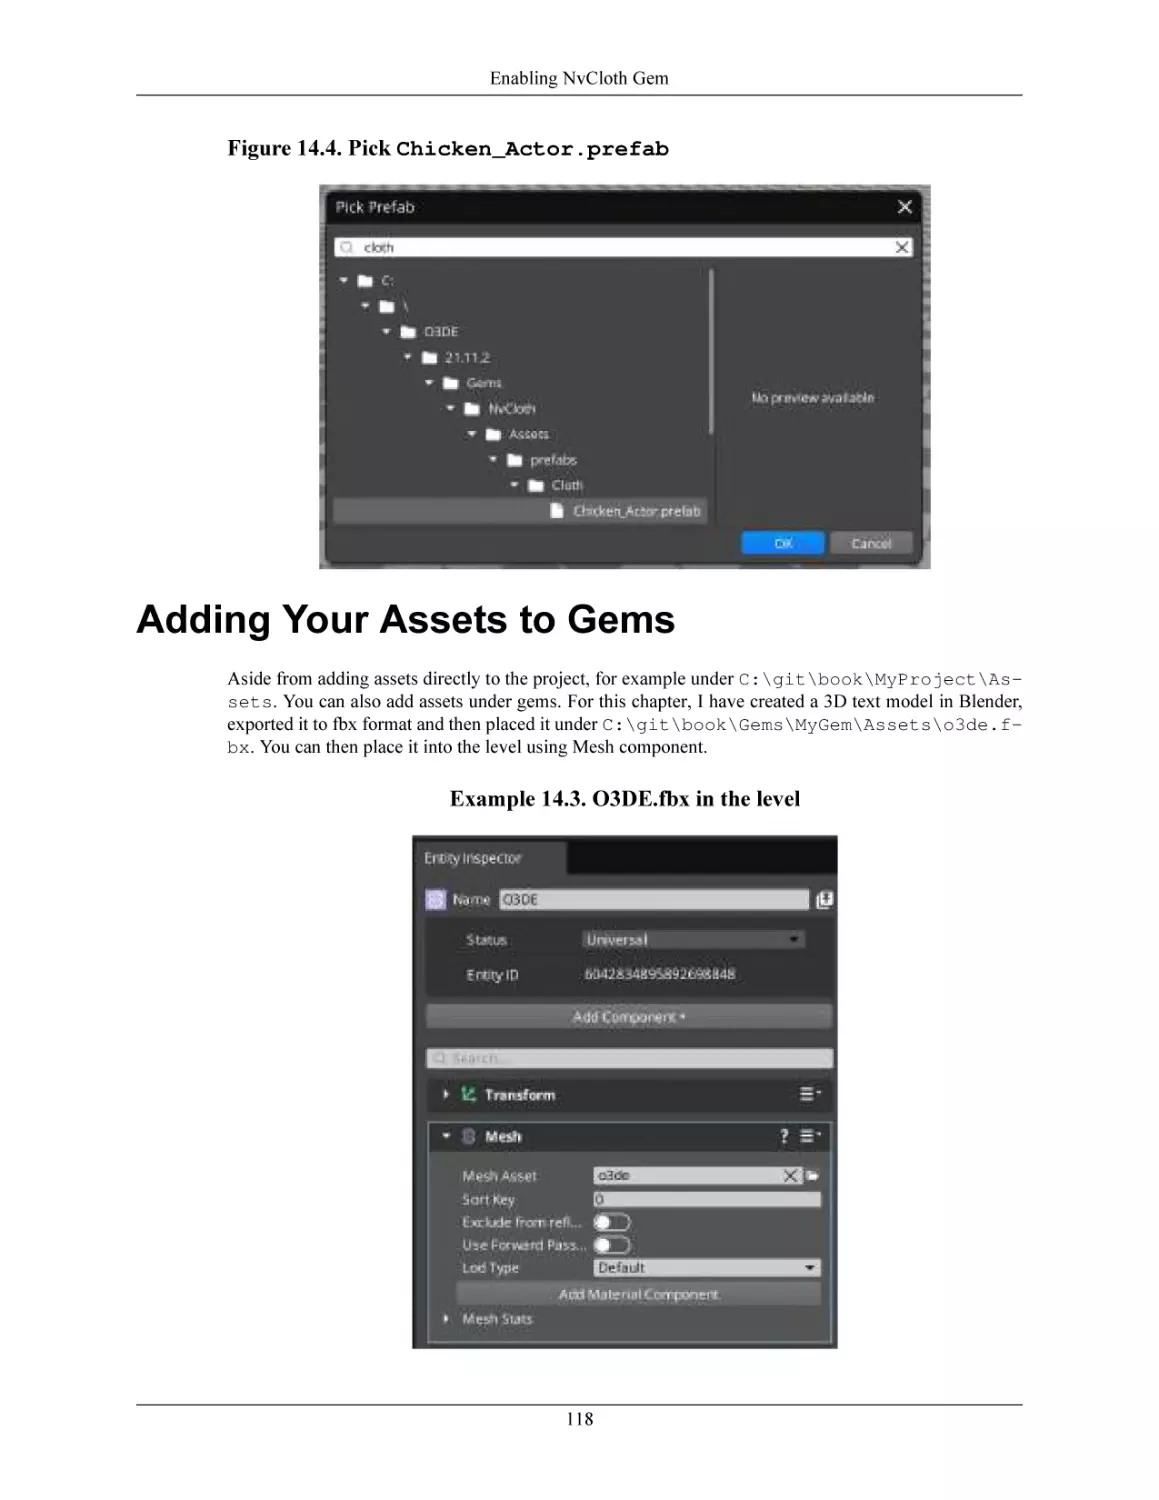 Adding Your Assets to Gems